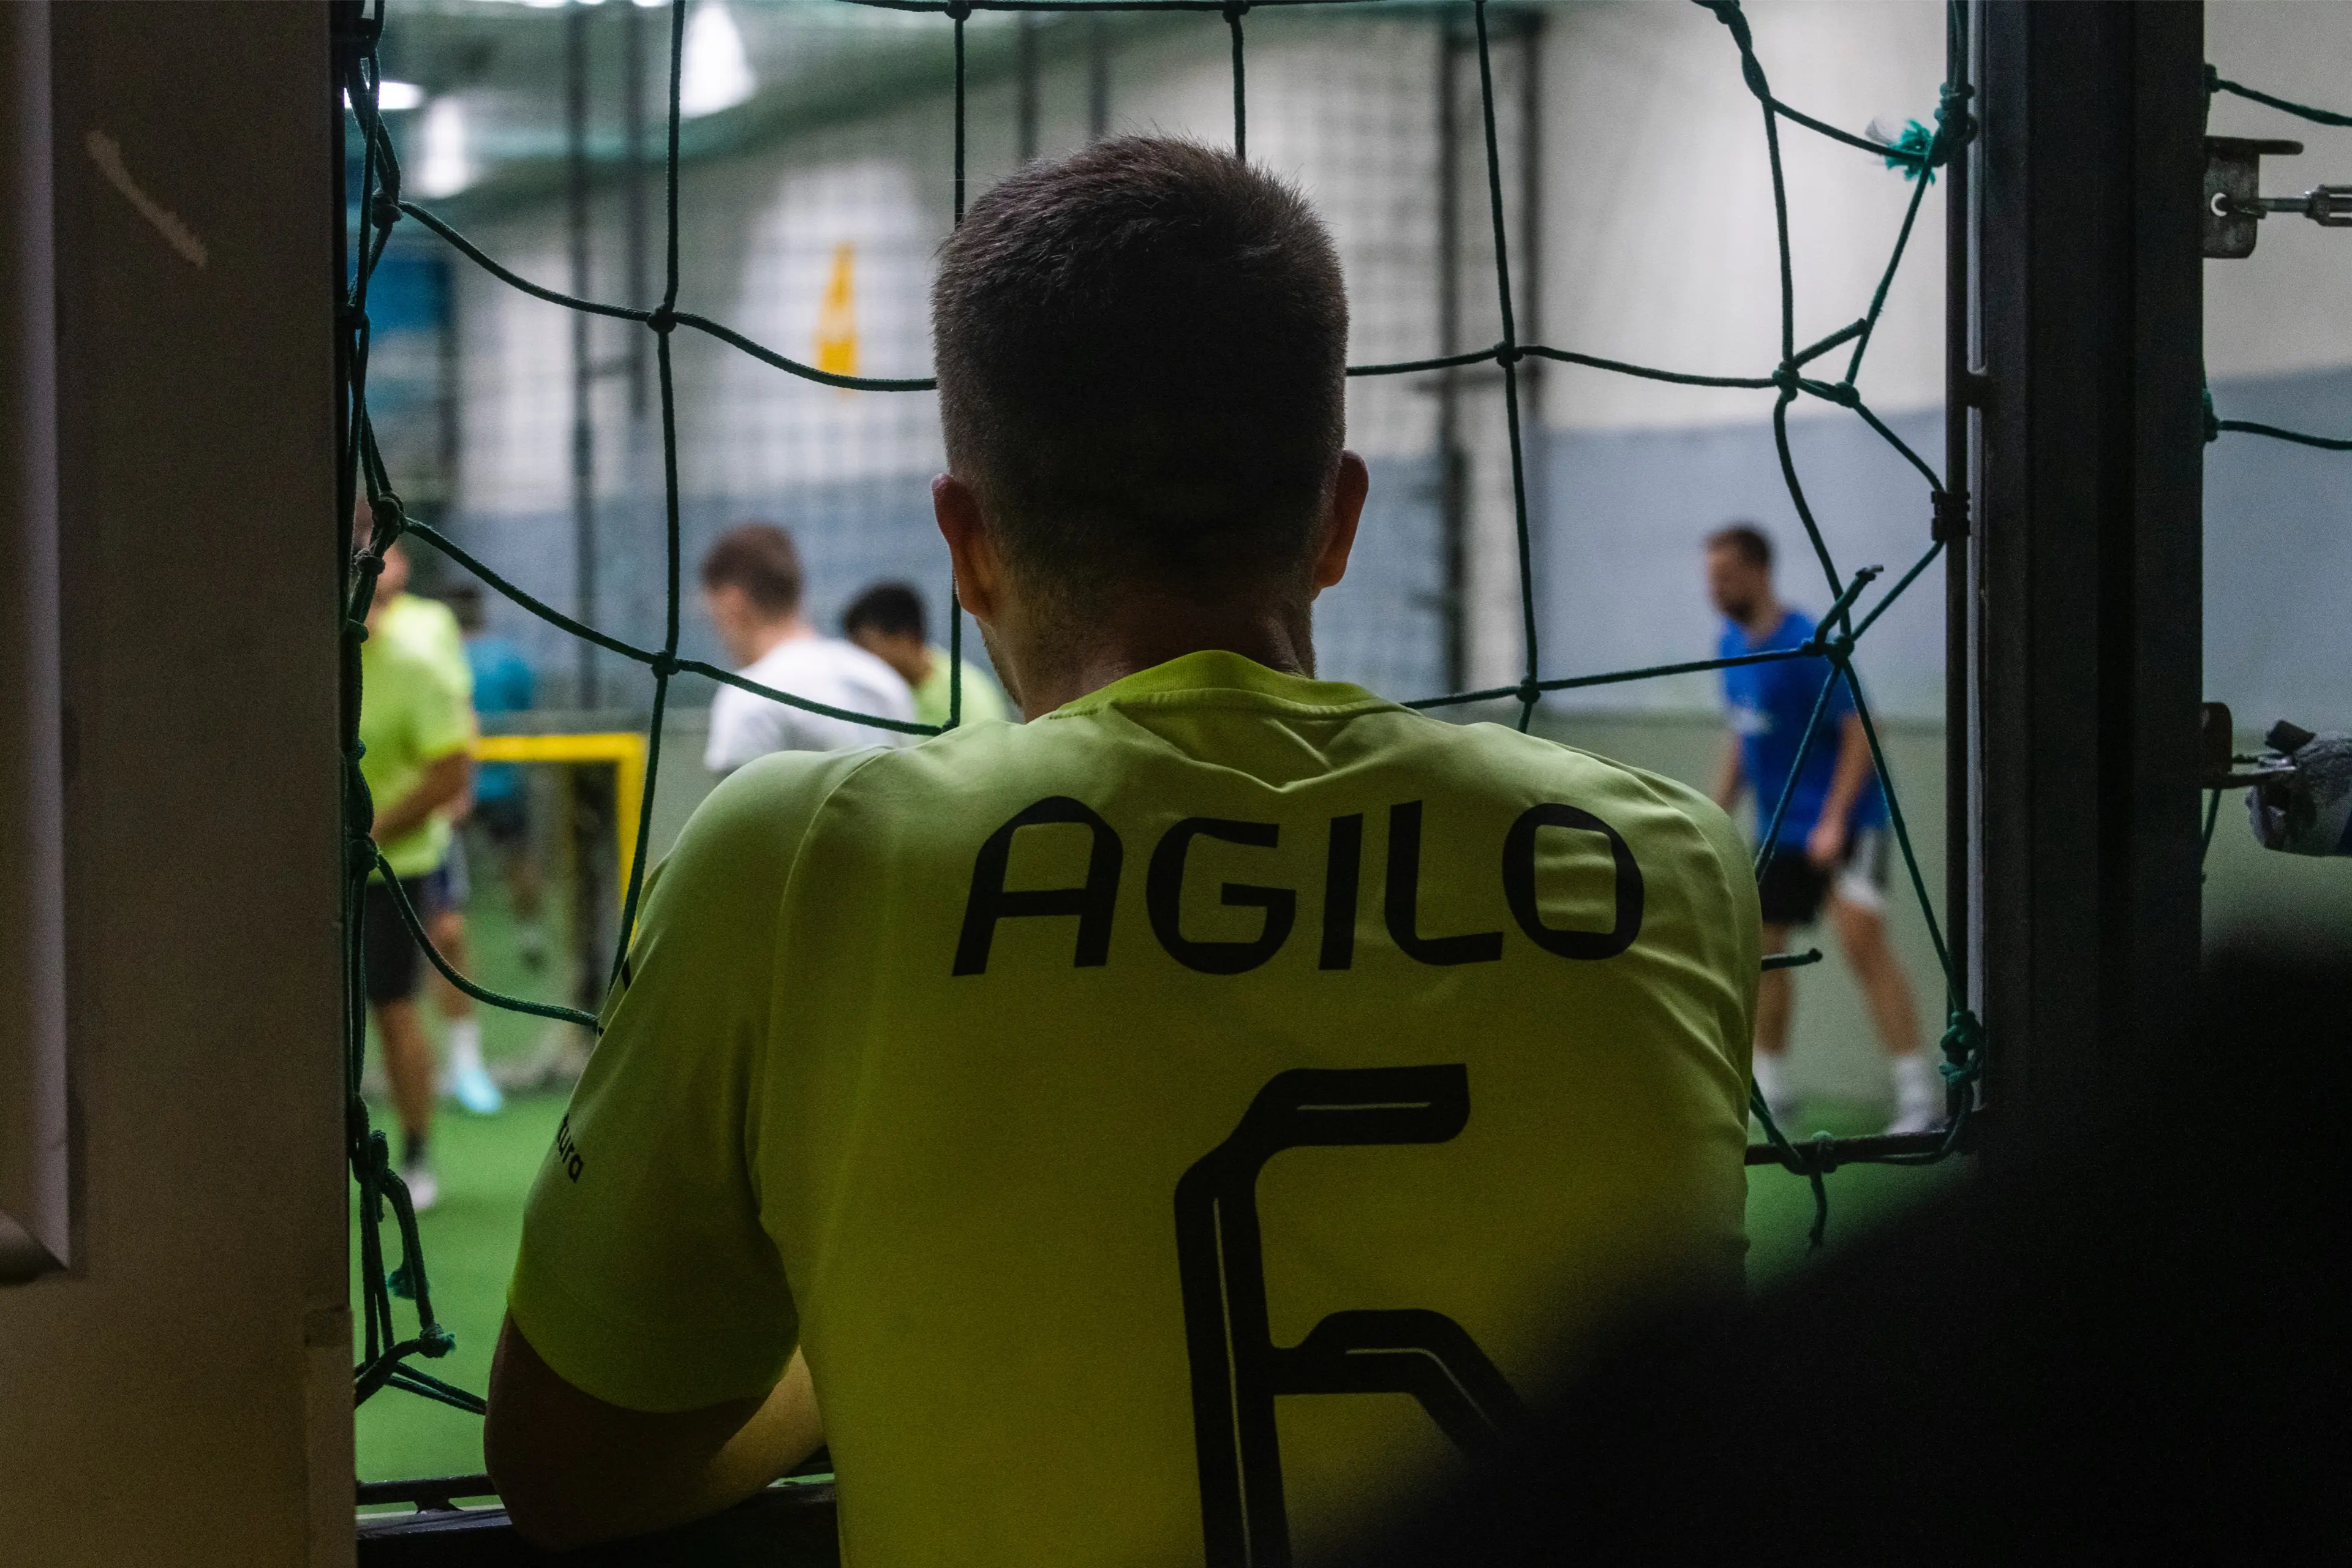 Agilo player from the back